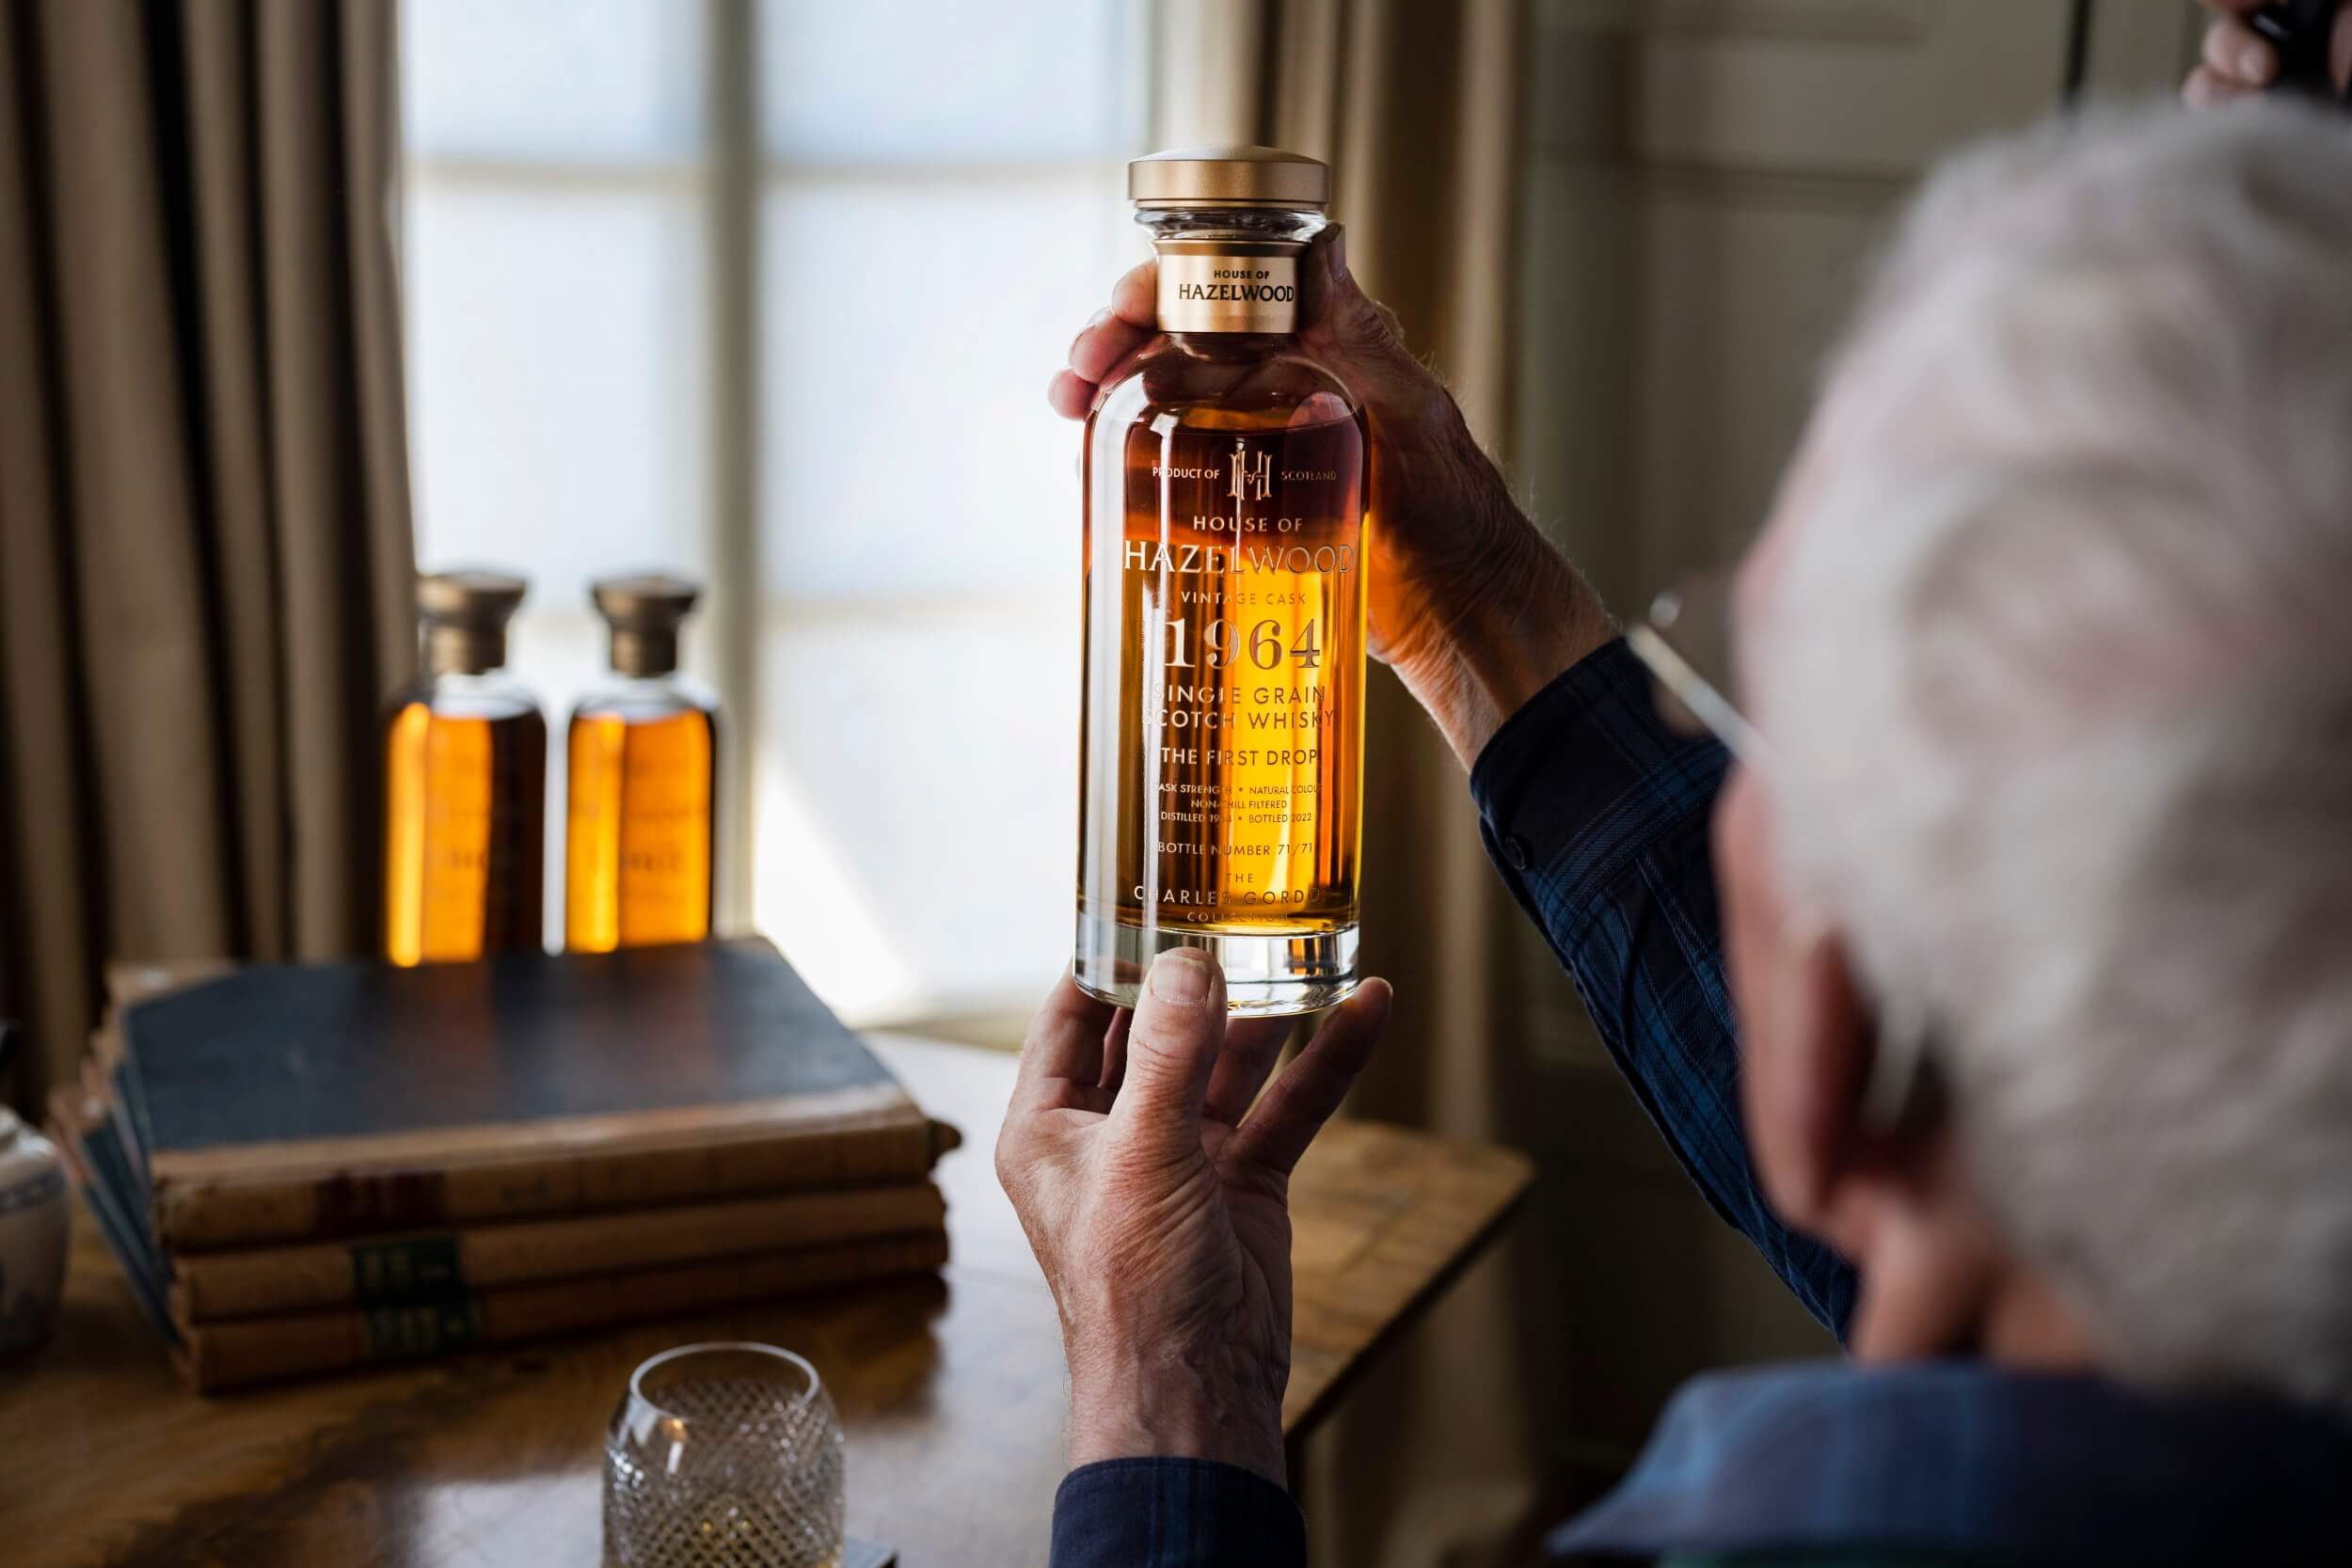 A Whisky expert examining a bottle of The First Drop.